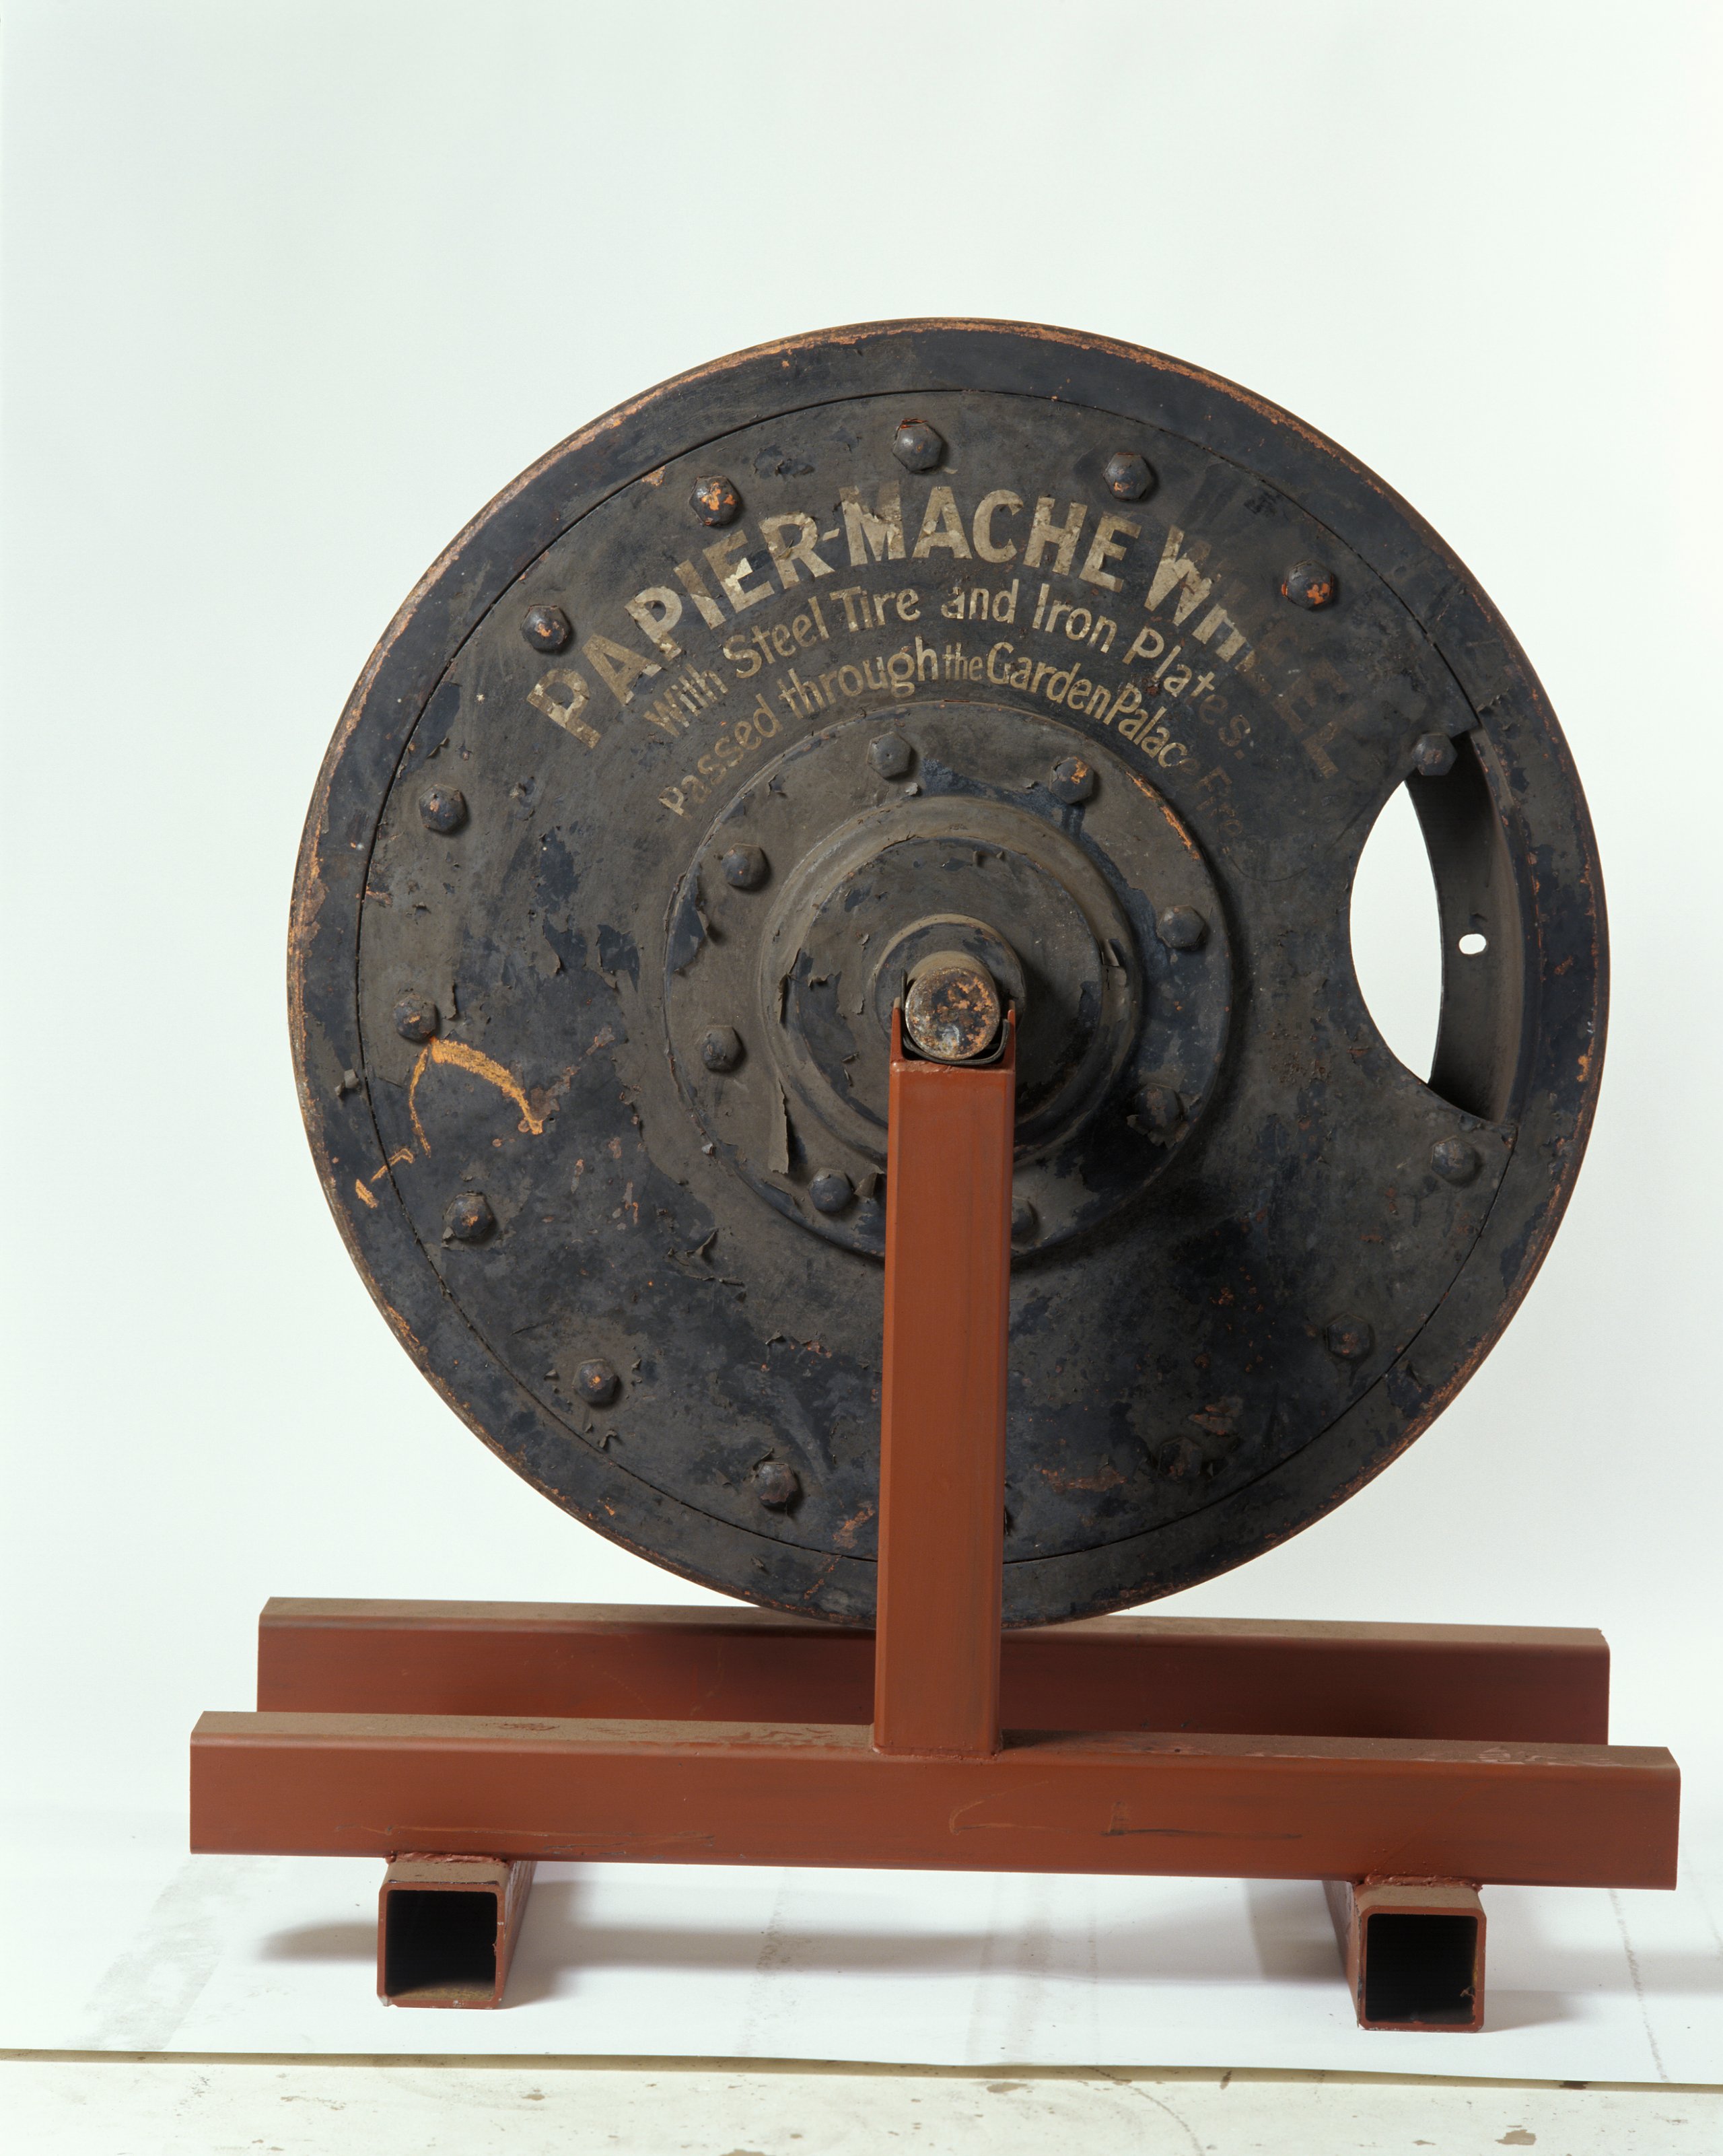 Sectioned display sample of Allen's patent paper-centred railway carriage wheel, 1875-8